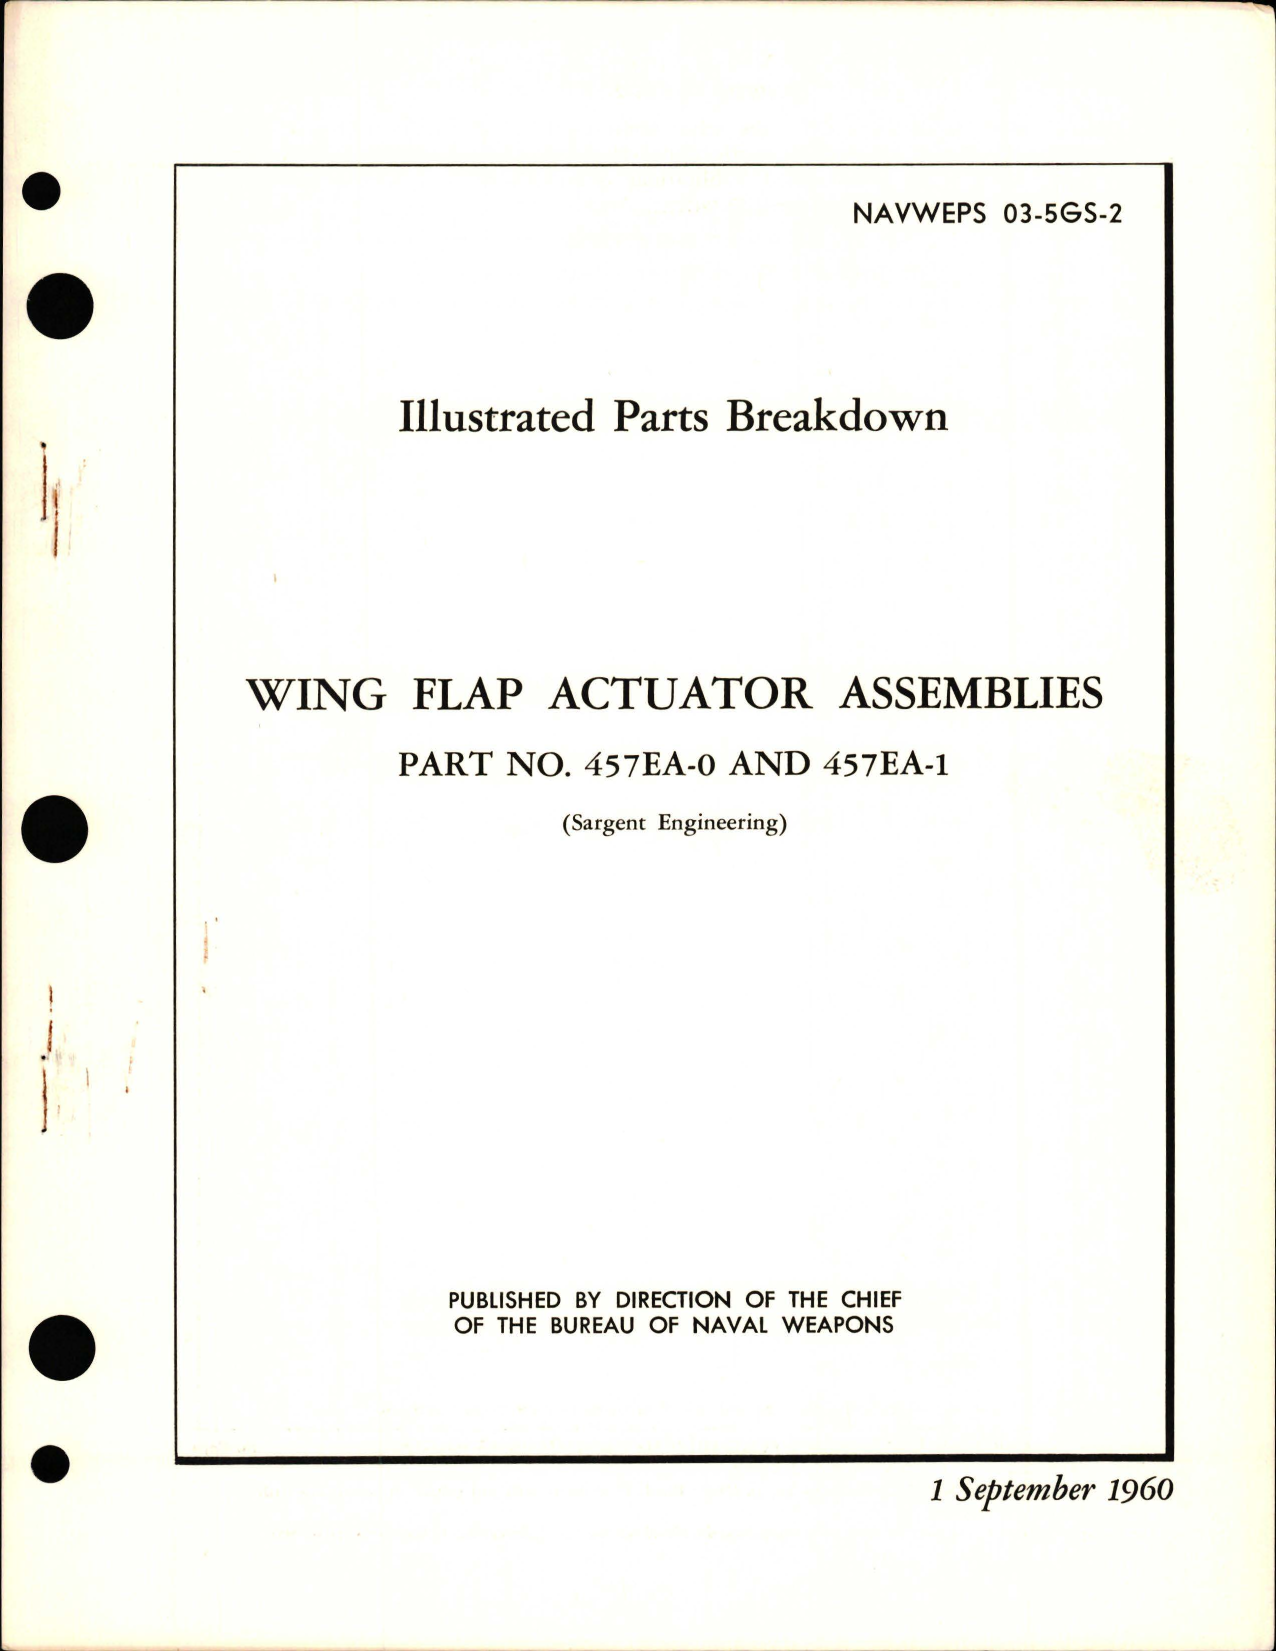 Sample page 1 from AirCorps Library document: Illustrated Parts Breakdown for Wing Flap Actuator Assembly - Parts 457EA-0 and 457EA-1